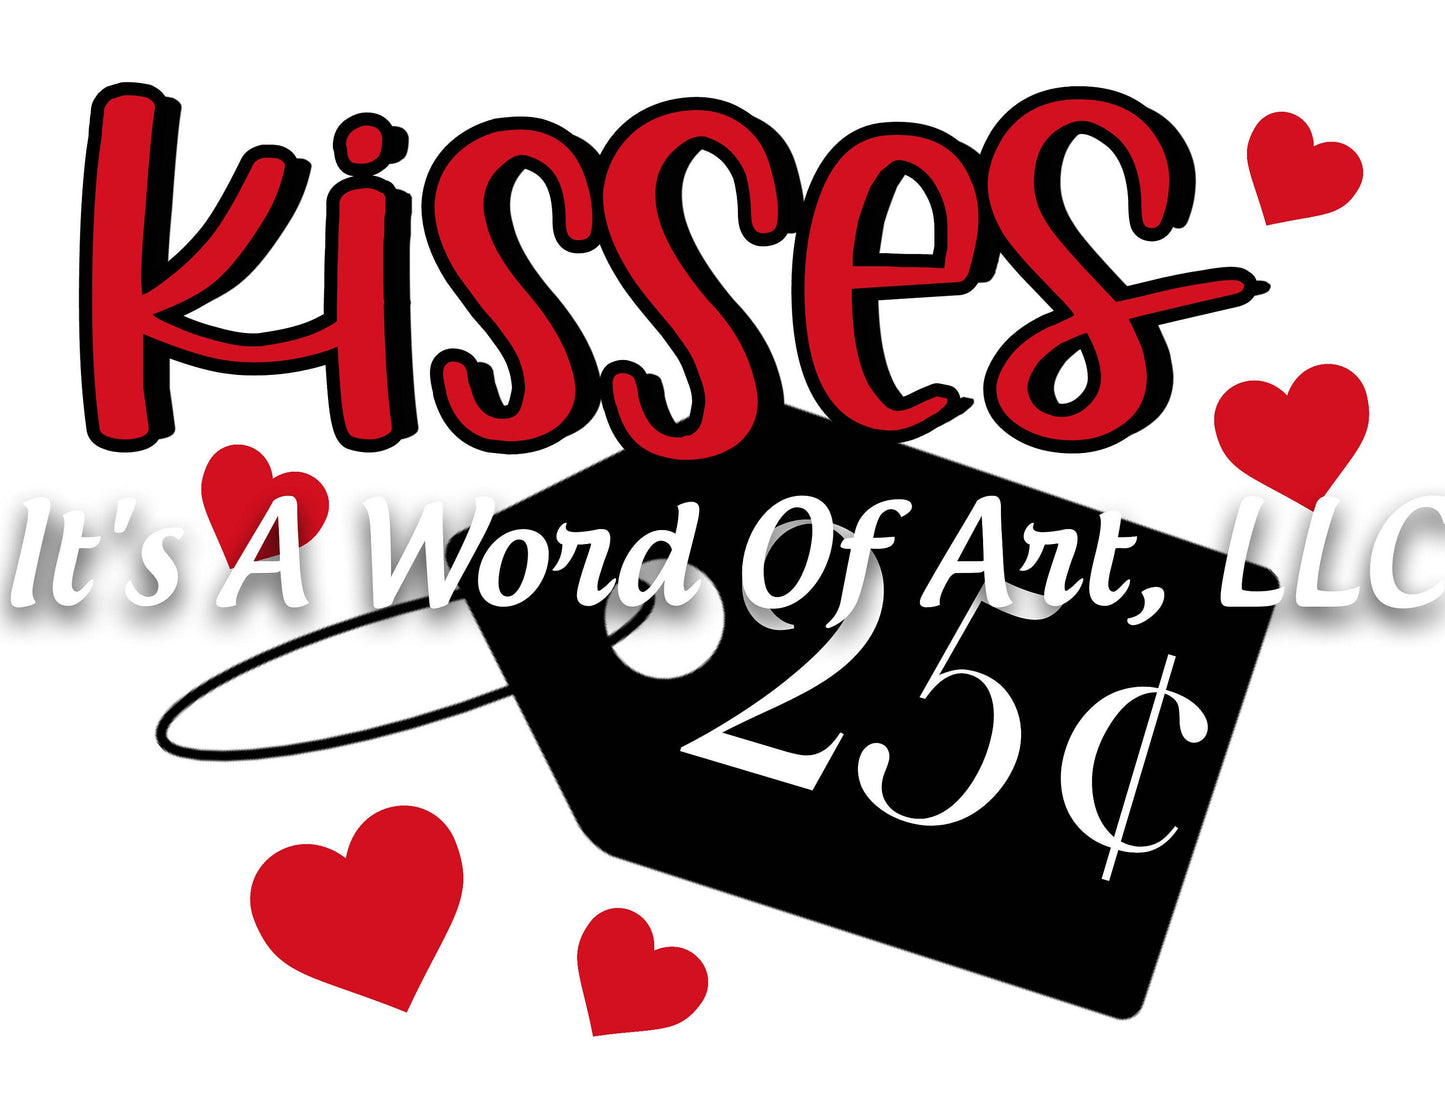 Valentines Day 27 - Kisses 25 Cents Hearts - Sublimation Transfer Set/Ready To Press Sublimation Transfer/Sublimation Transfer